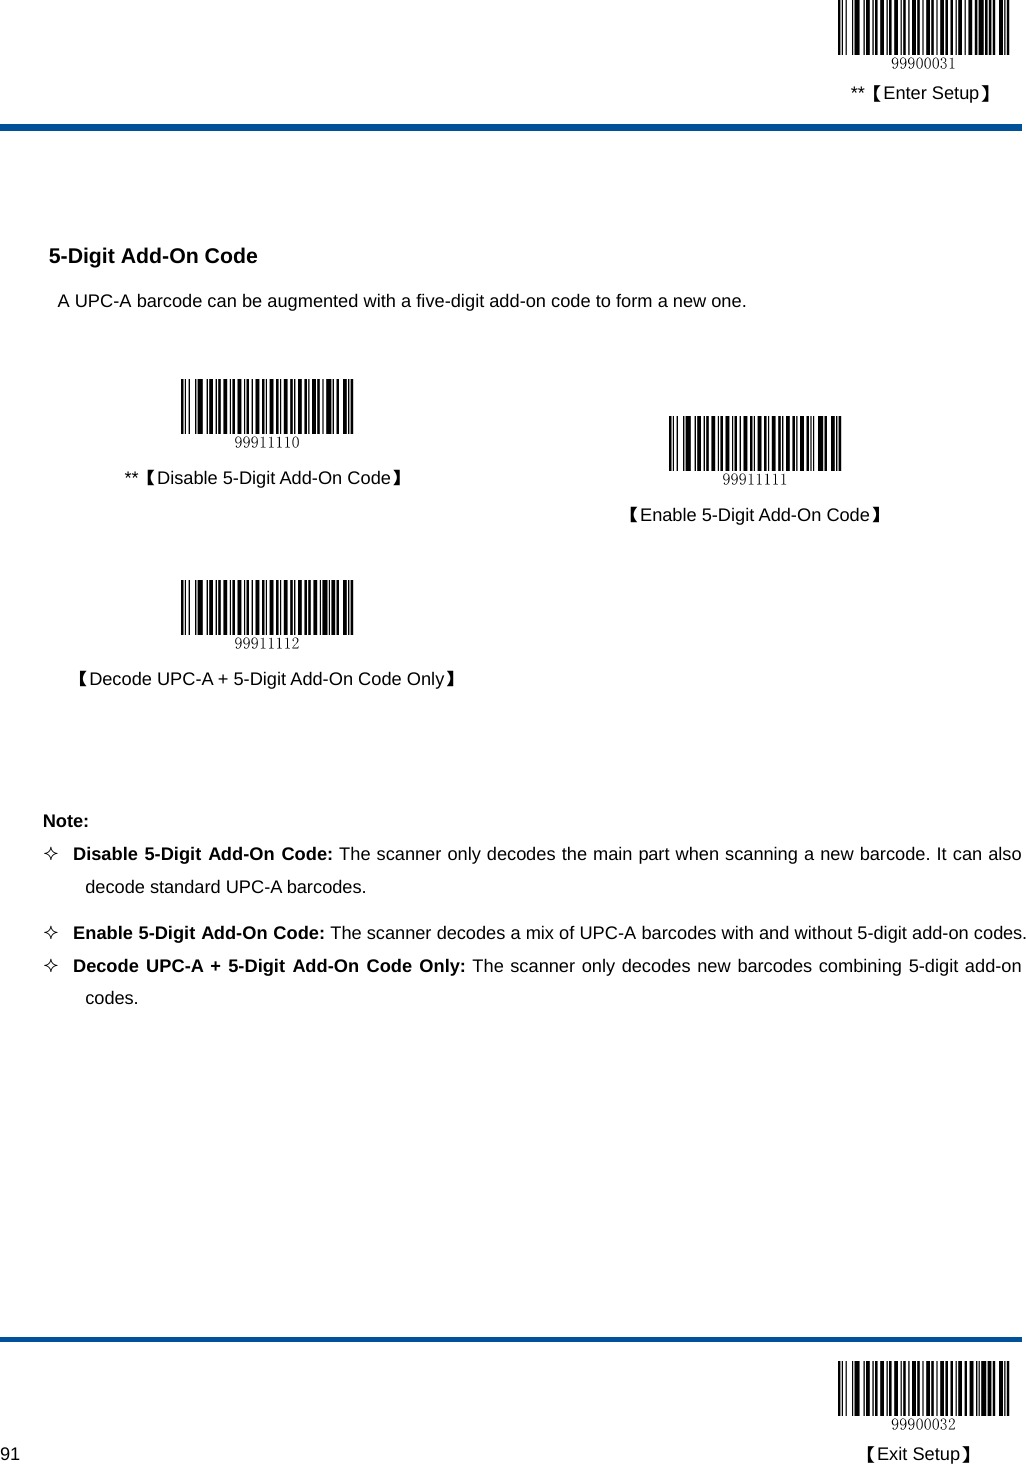  **【Enter Setup】  91                                                                                                                                                                                        【Exit Setup】   5-Digit Add-On Code A UPC-A barcode can be augmented with a five-digit add-on code to form a new one.     **【Disable 5-Digit Add-On Code】   【Enable 5-Digit Add-On Code】     【Decode UPC-A + 5-Digit Add-On Code Only】    Note:  Disable 5-Digit Add-On Code: The scanner only decodes the main part when scanning a new barcode. It can also decode standard UPC-A barcodes.  Enable 5-Digit Add-On Code: The scanner decodes a mix of UPC-A barcodes with and without 5-digit add-on codes.  Decode UPC-A + 5-Digit Add-On Code Only: The scanner only decodes new barcodes combining 5-digit add-on codes. 